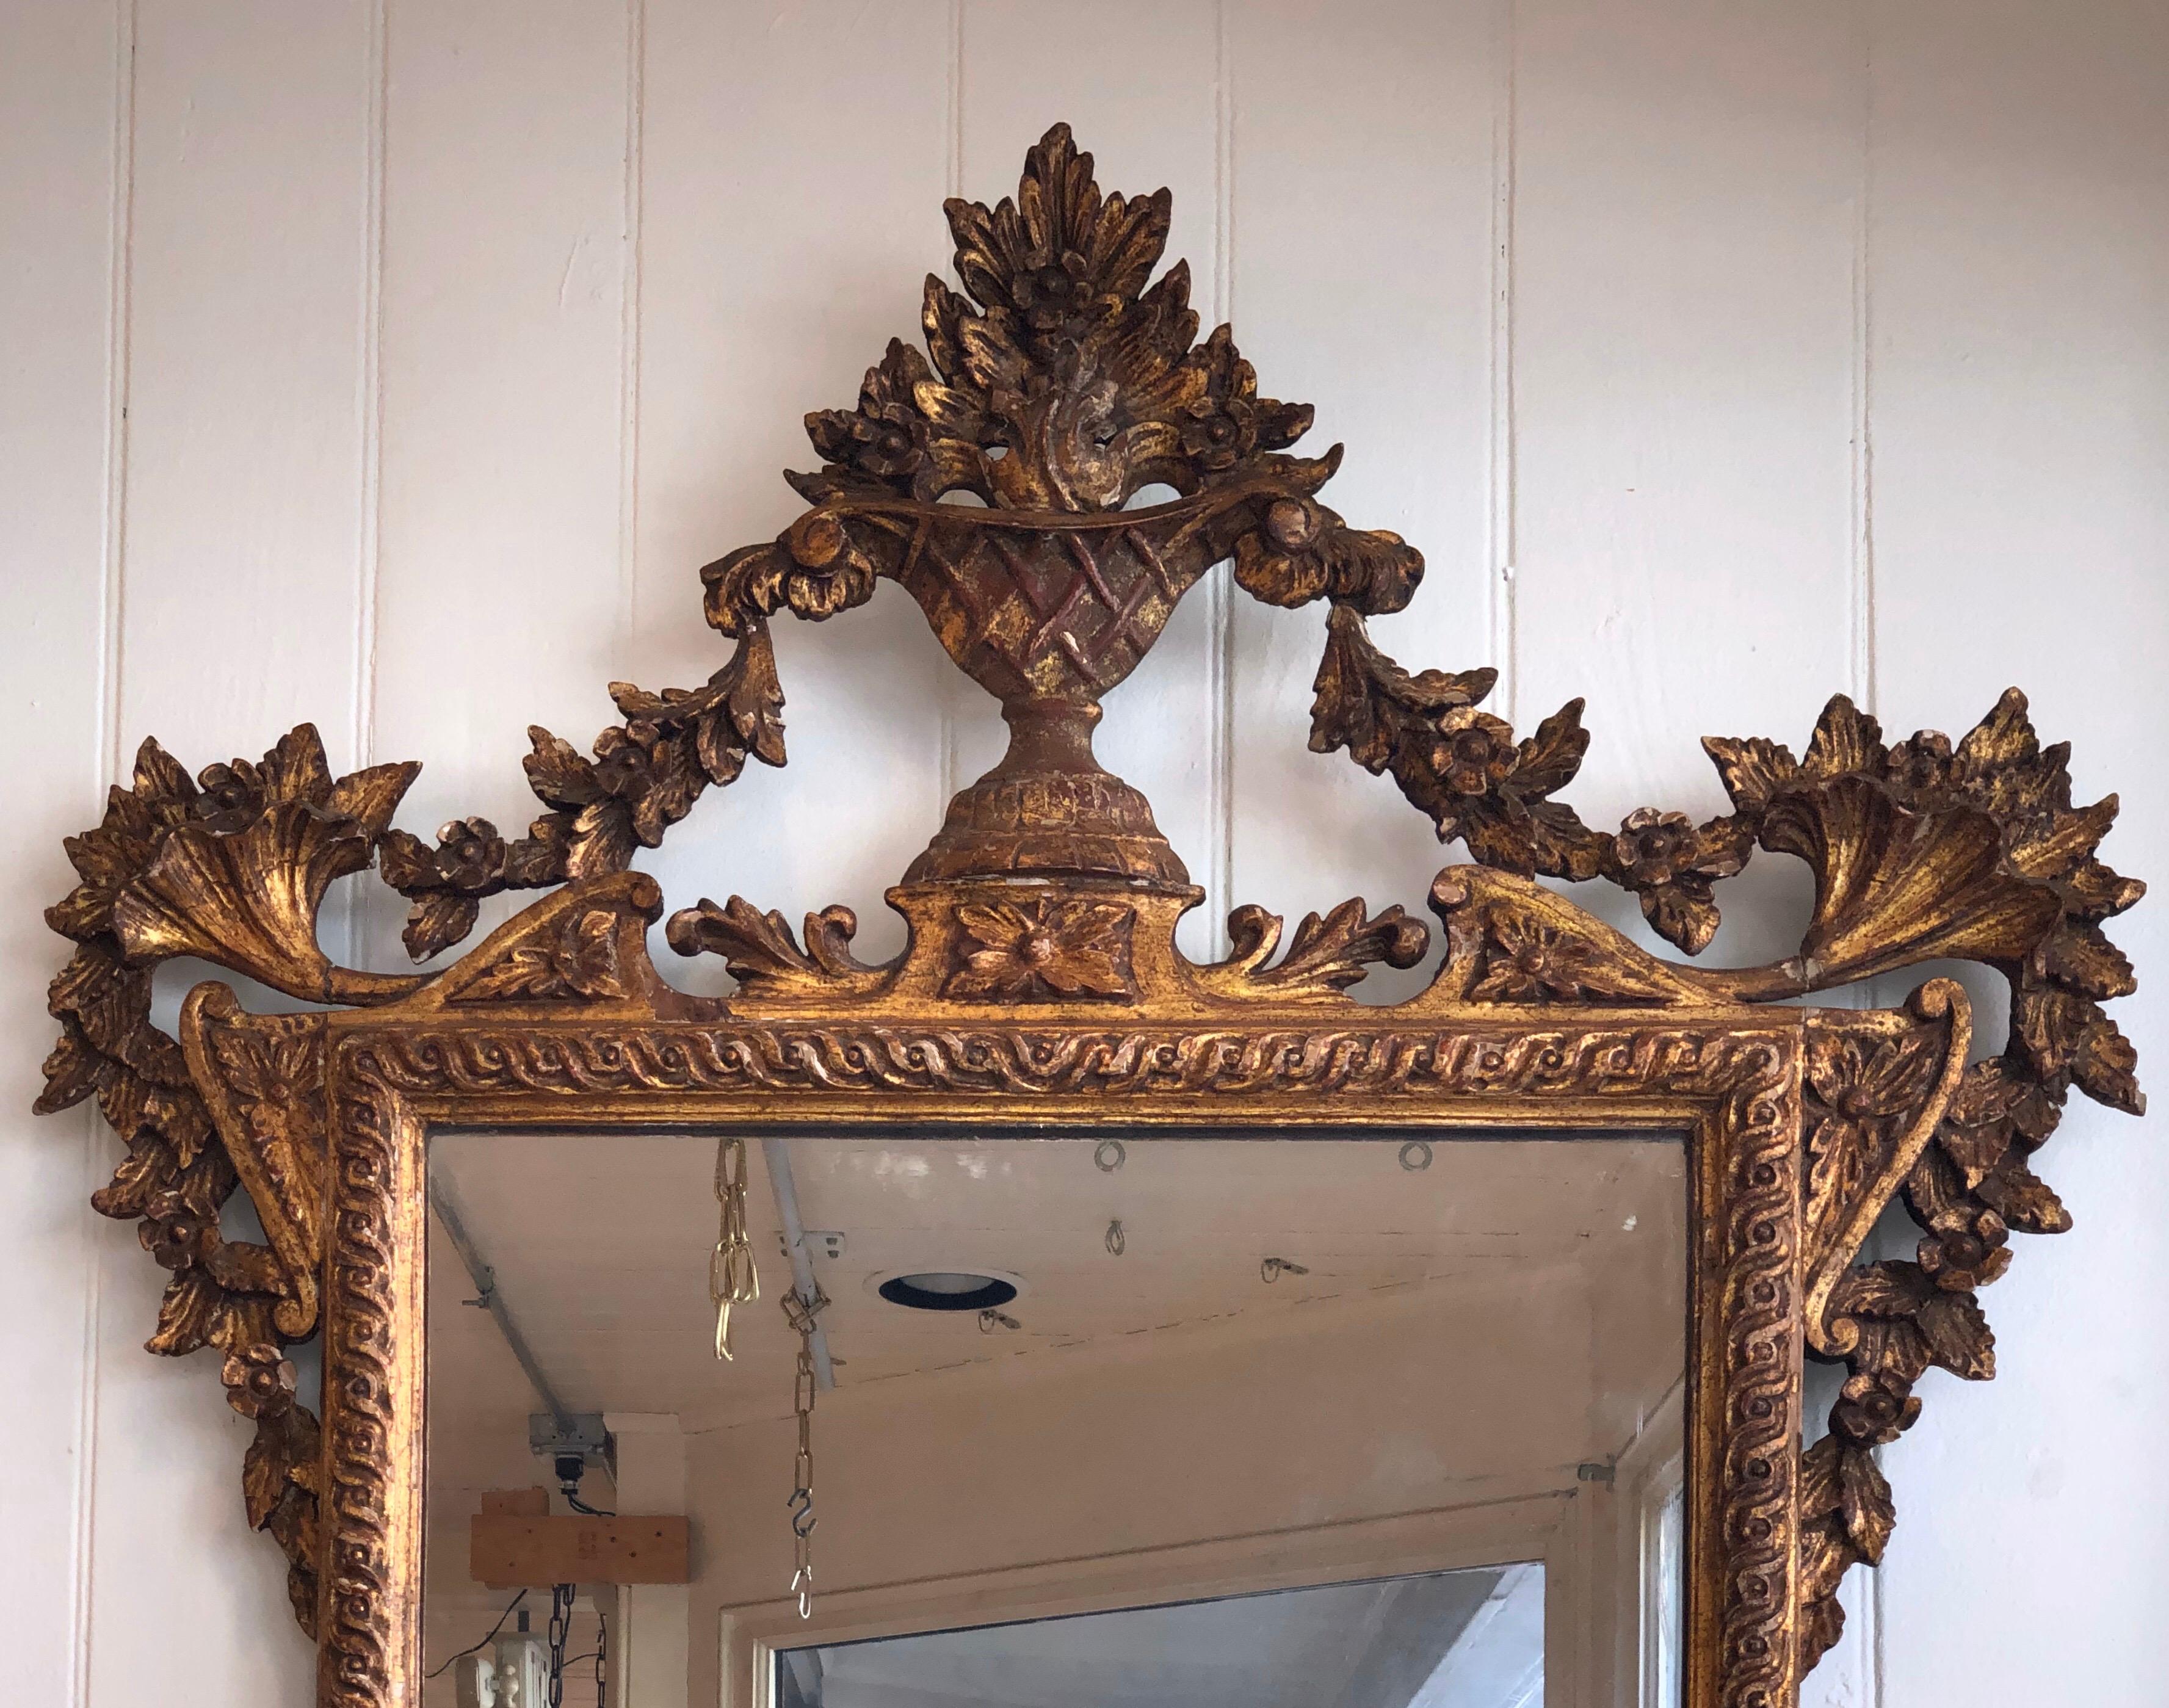 This 1790s neoclassical intricately craved giltwood pier mirror is crowned with a foliate design urn having delicate garland swags flowing to the Cornucopia corners and hanging down the sides. The looking glass is surrounded by an Ancient Greek Wave